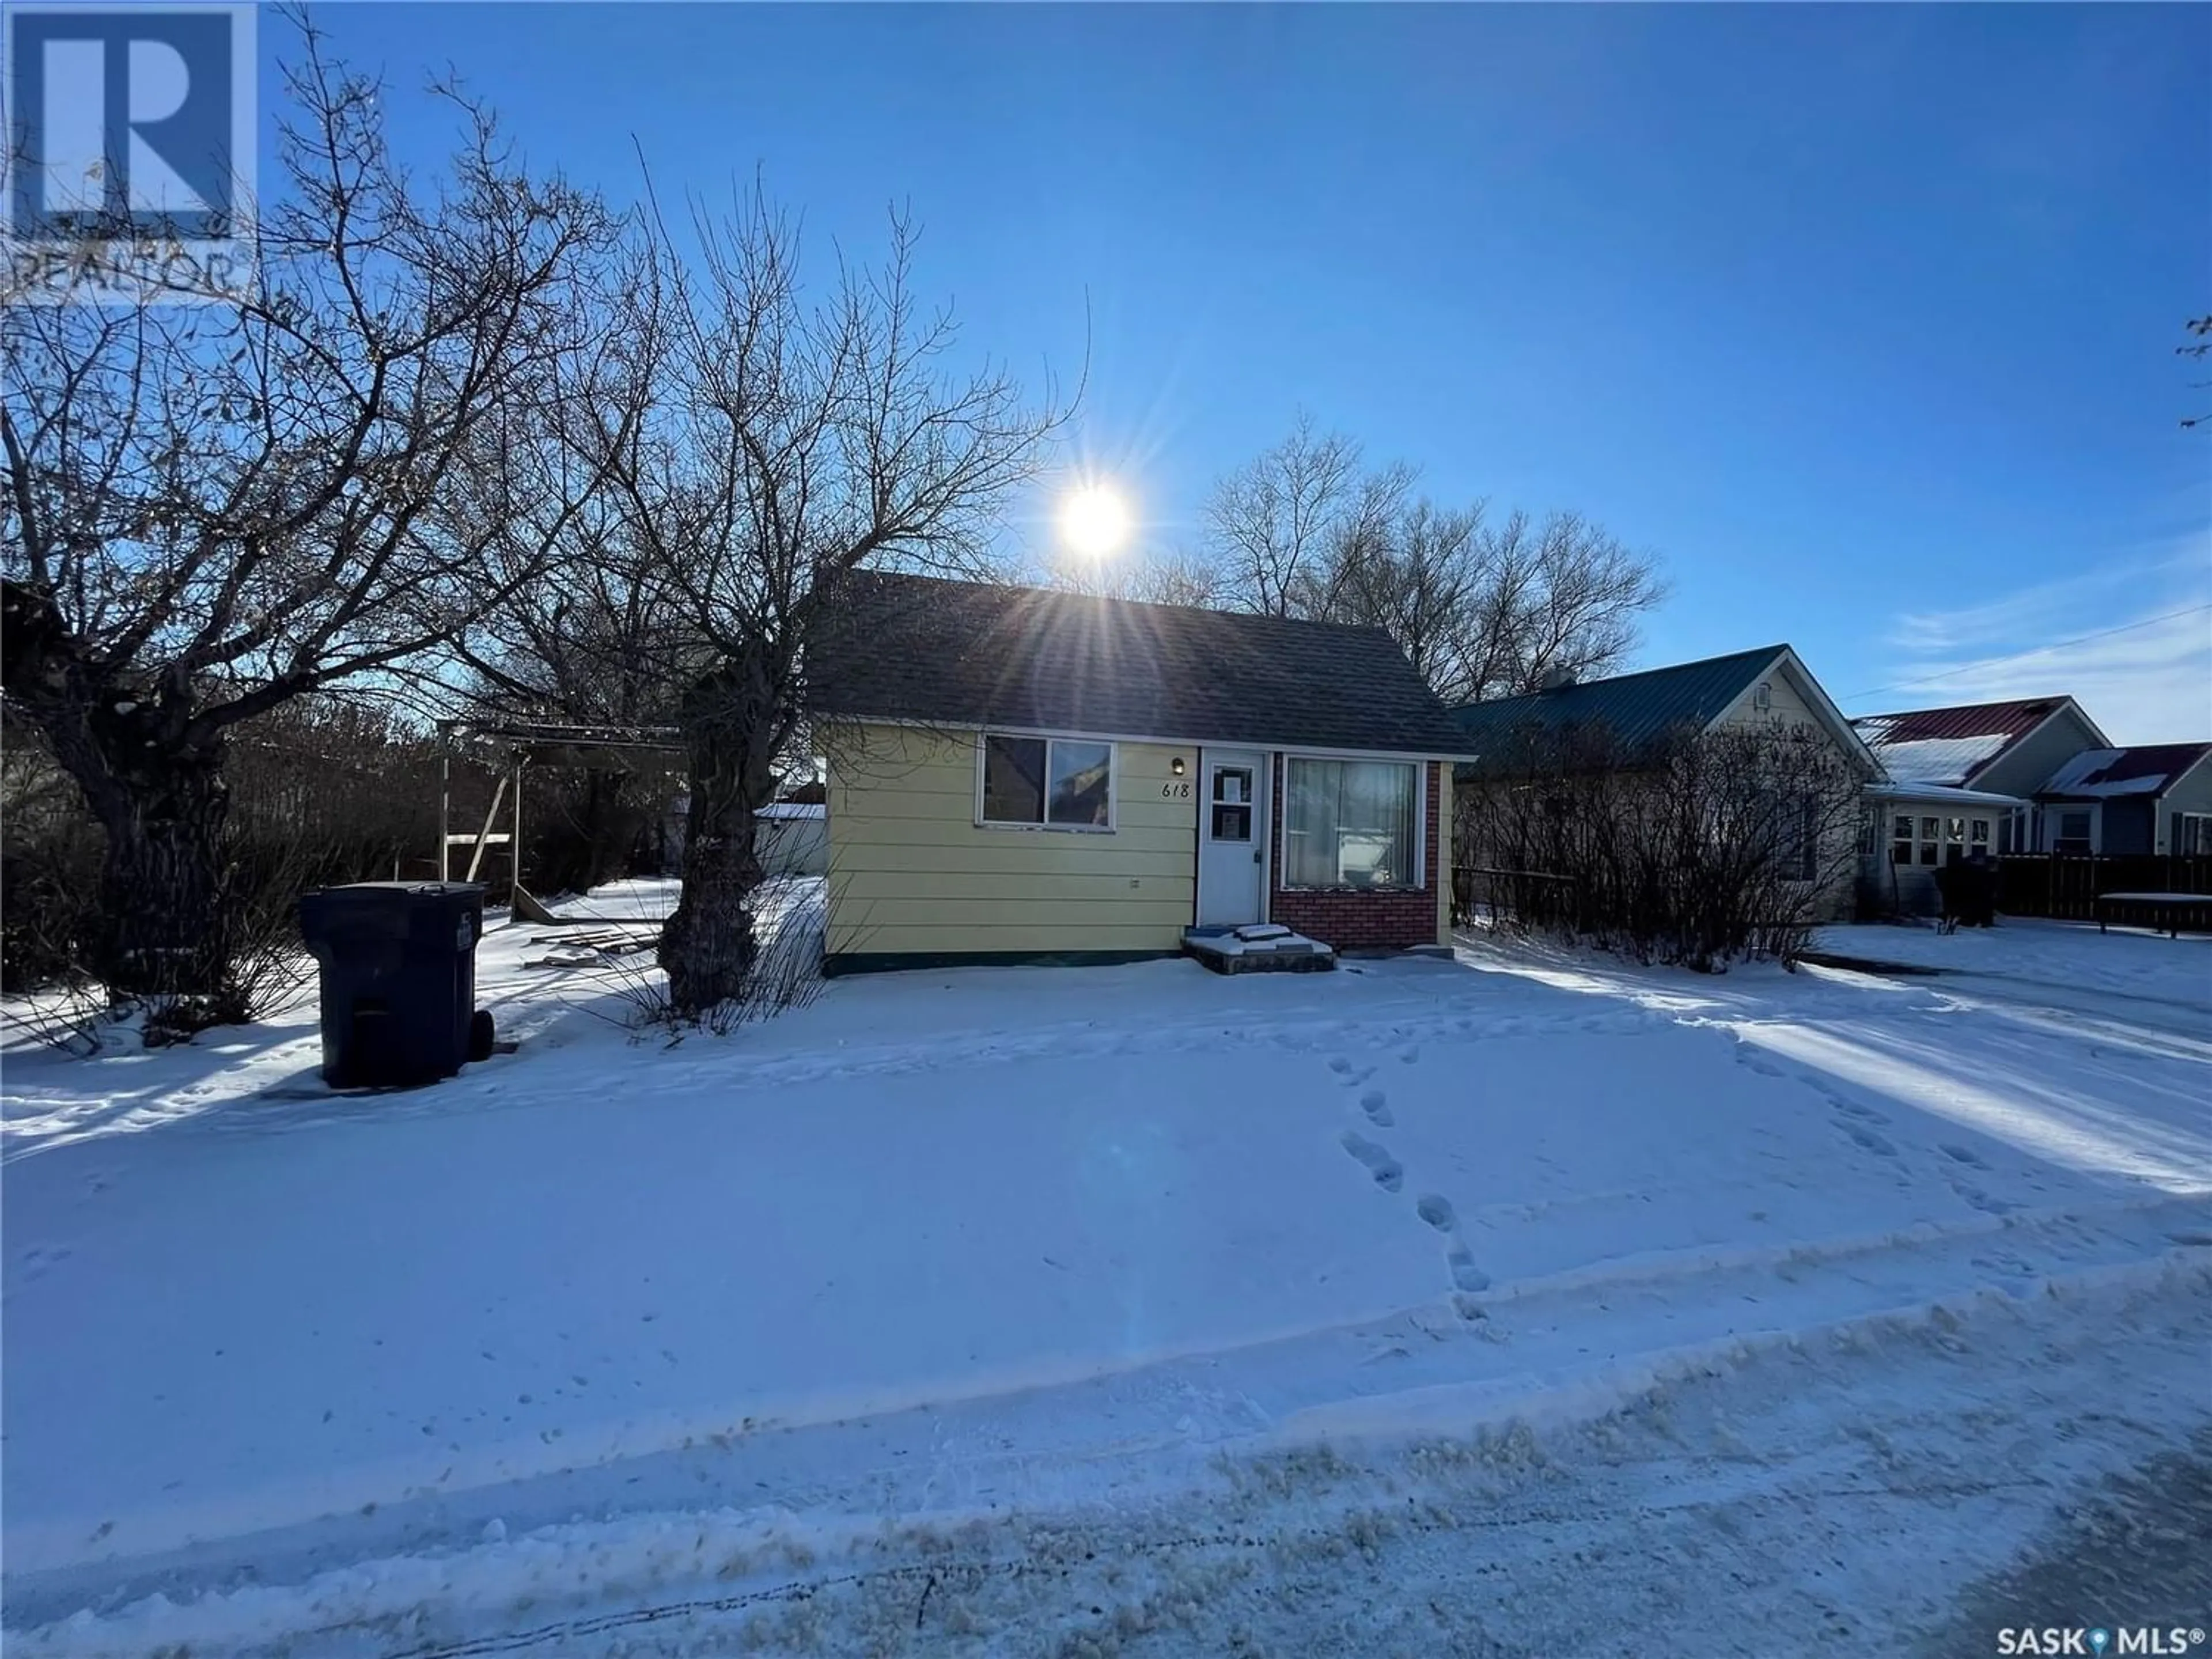 Home with unknown exterior material for 618 3rd STREET, Estevan Saskatchewan S4A0P6